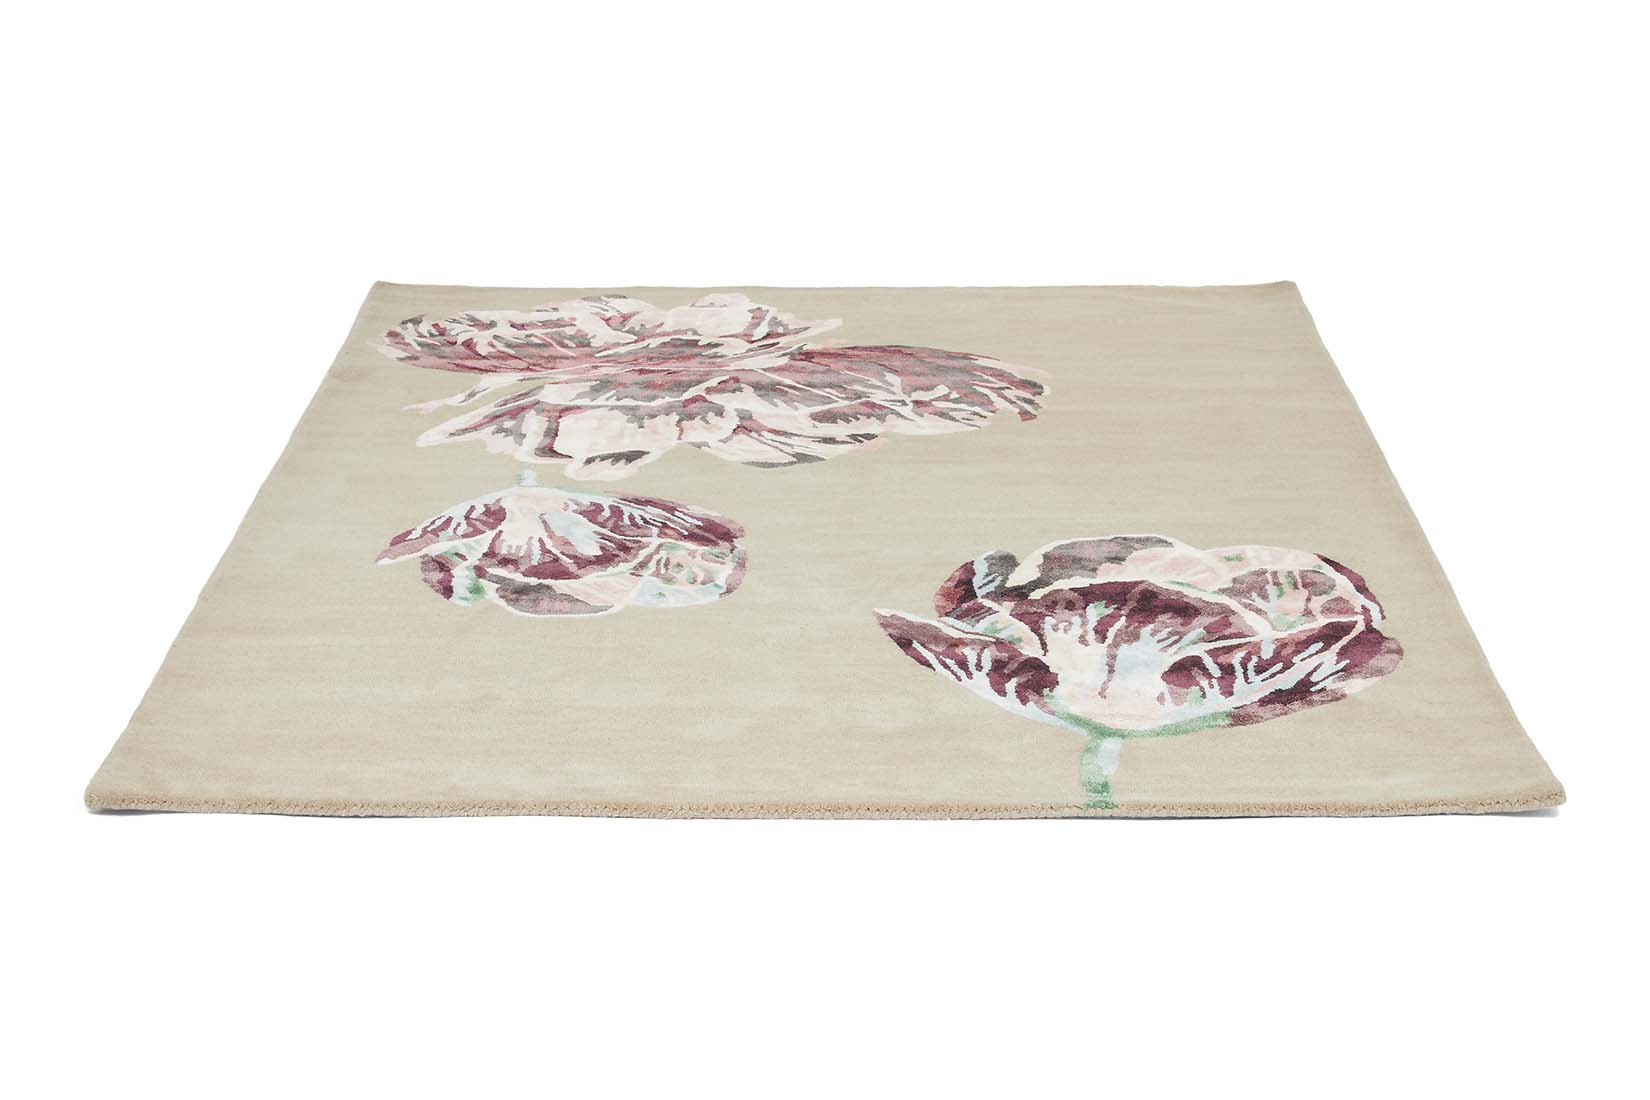 Rectangular beige rug with large white and purple flower motifs